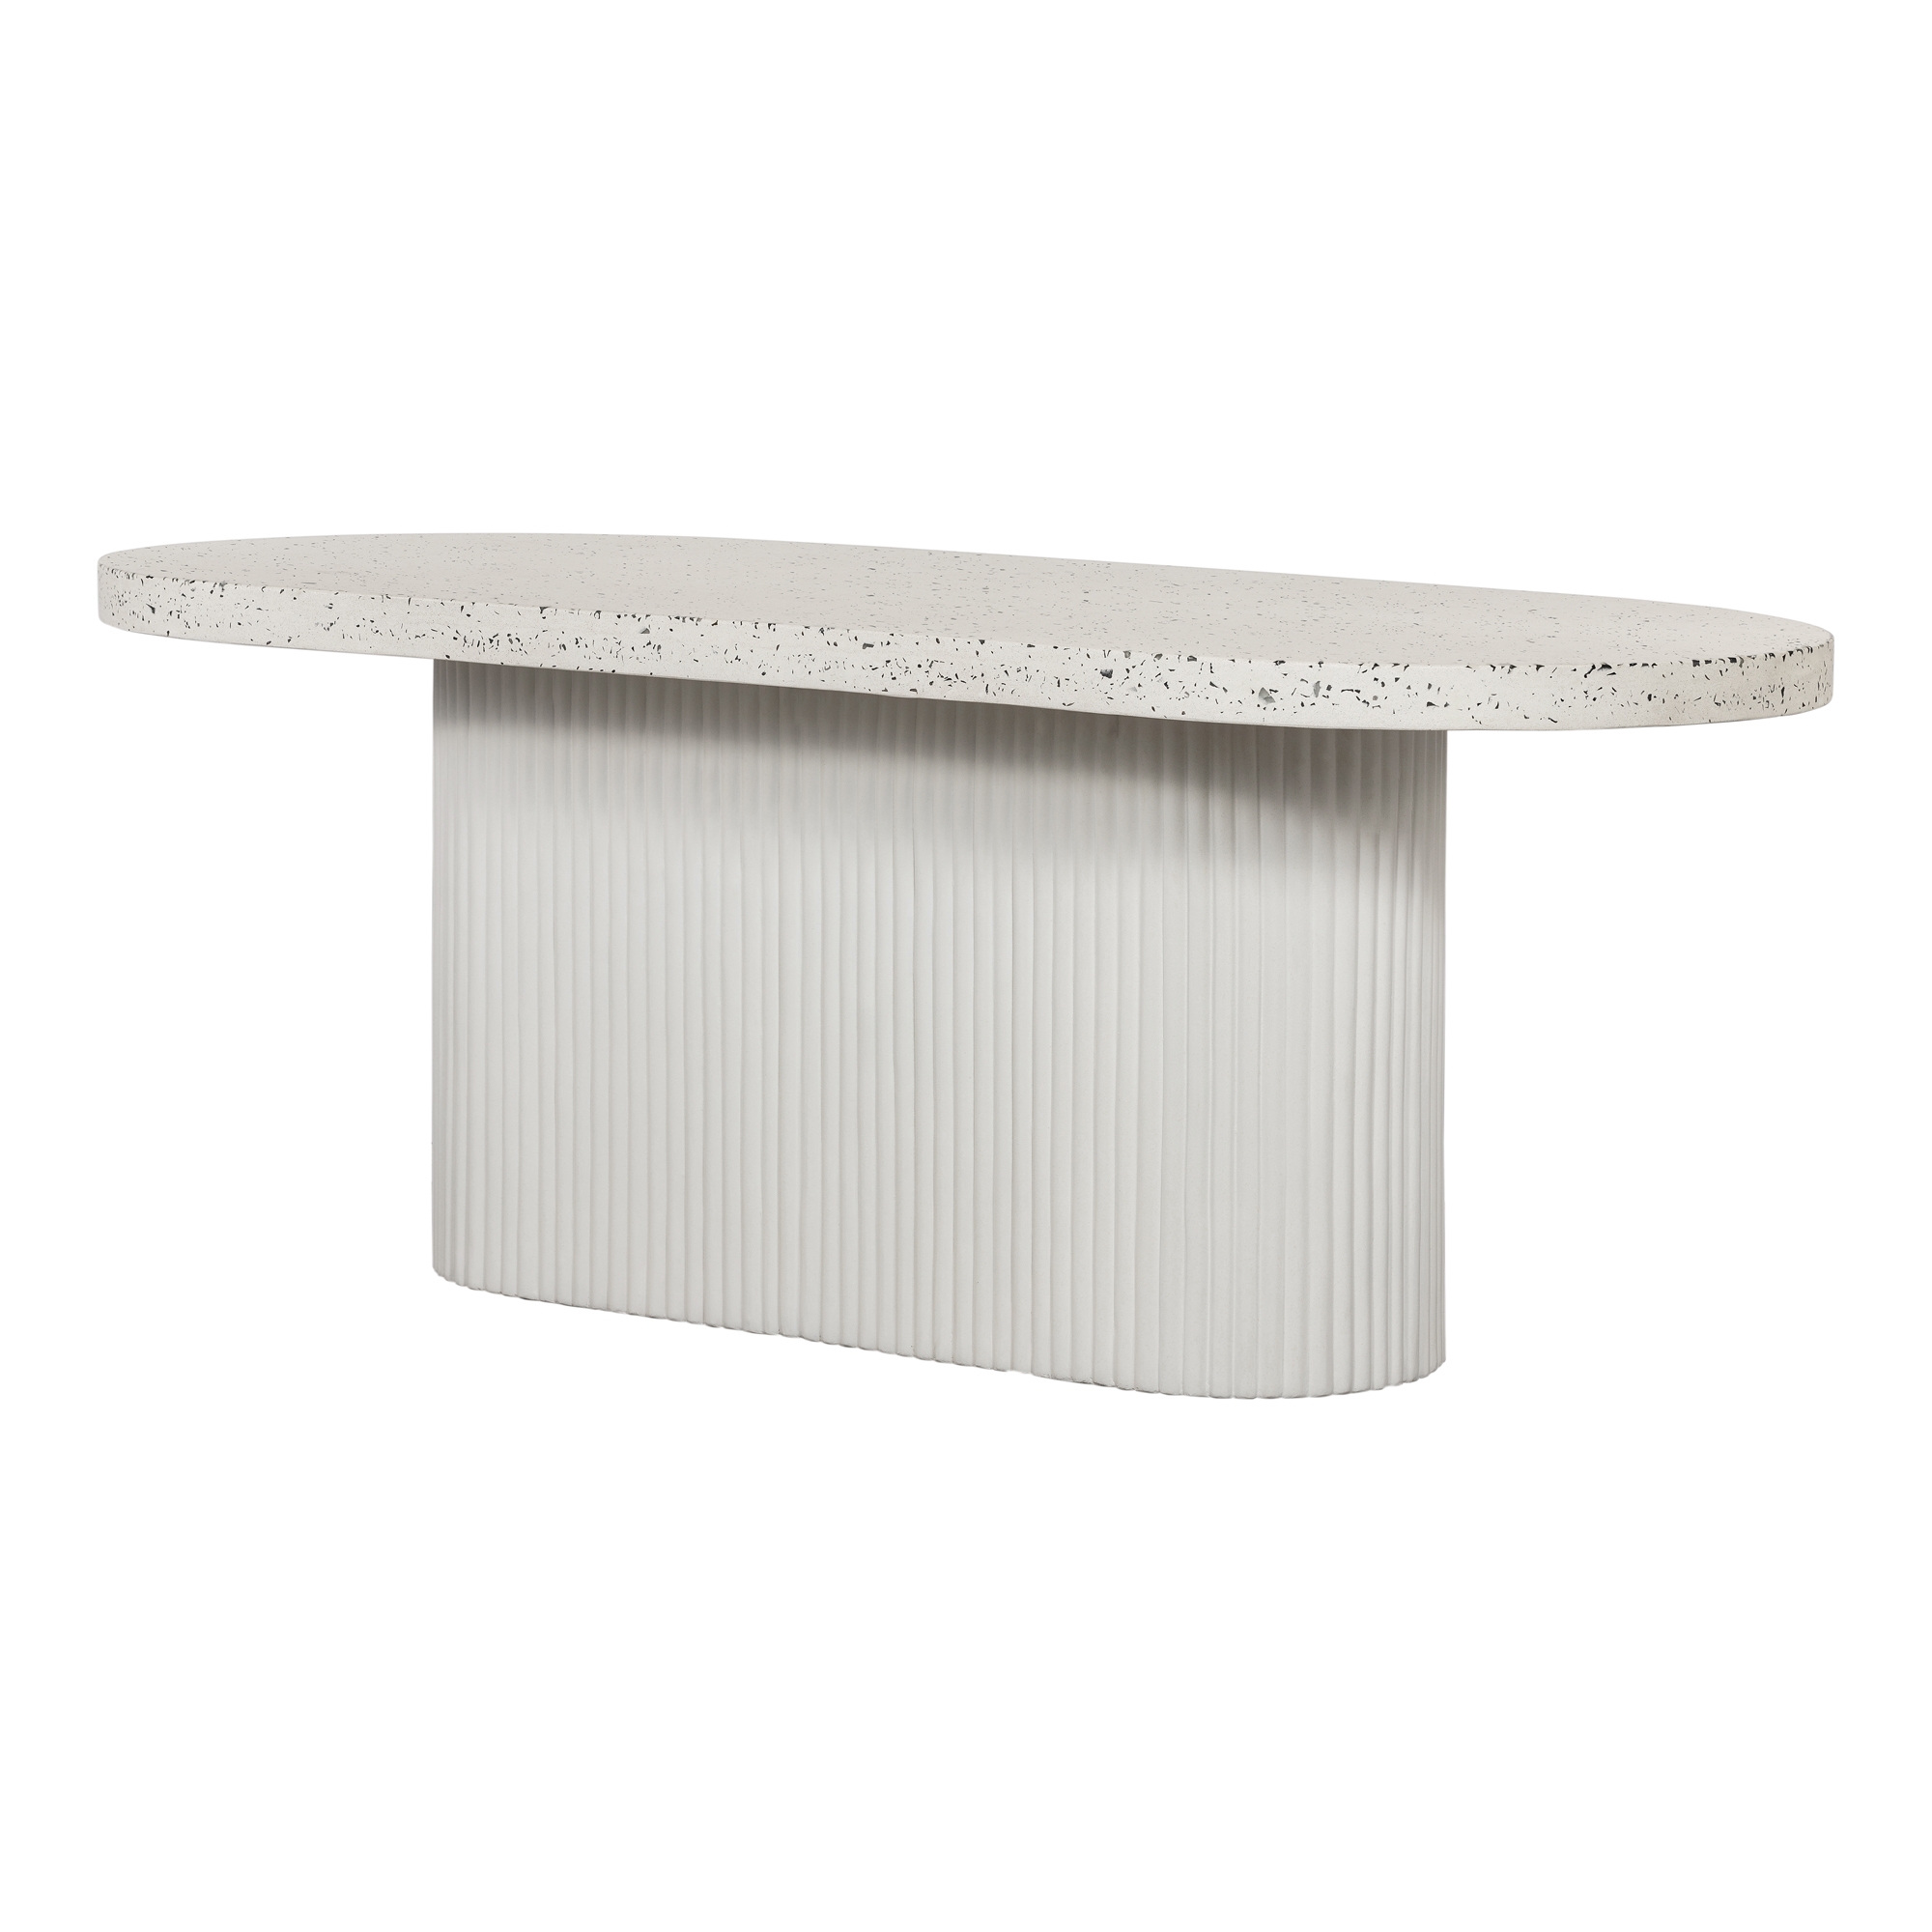 Lyon Outdoor Dining Table - Image 1